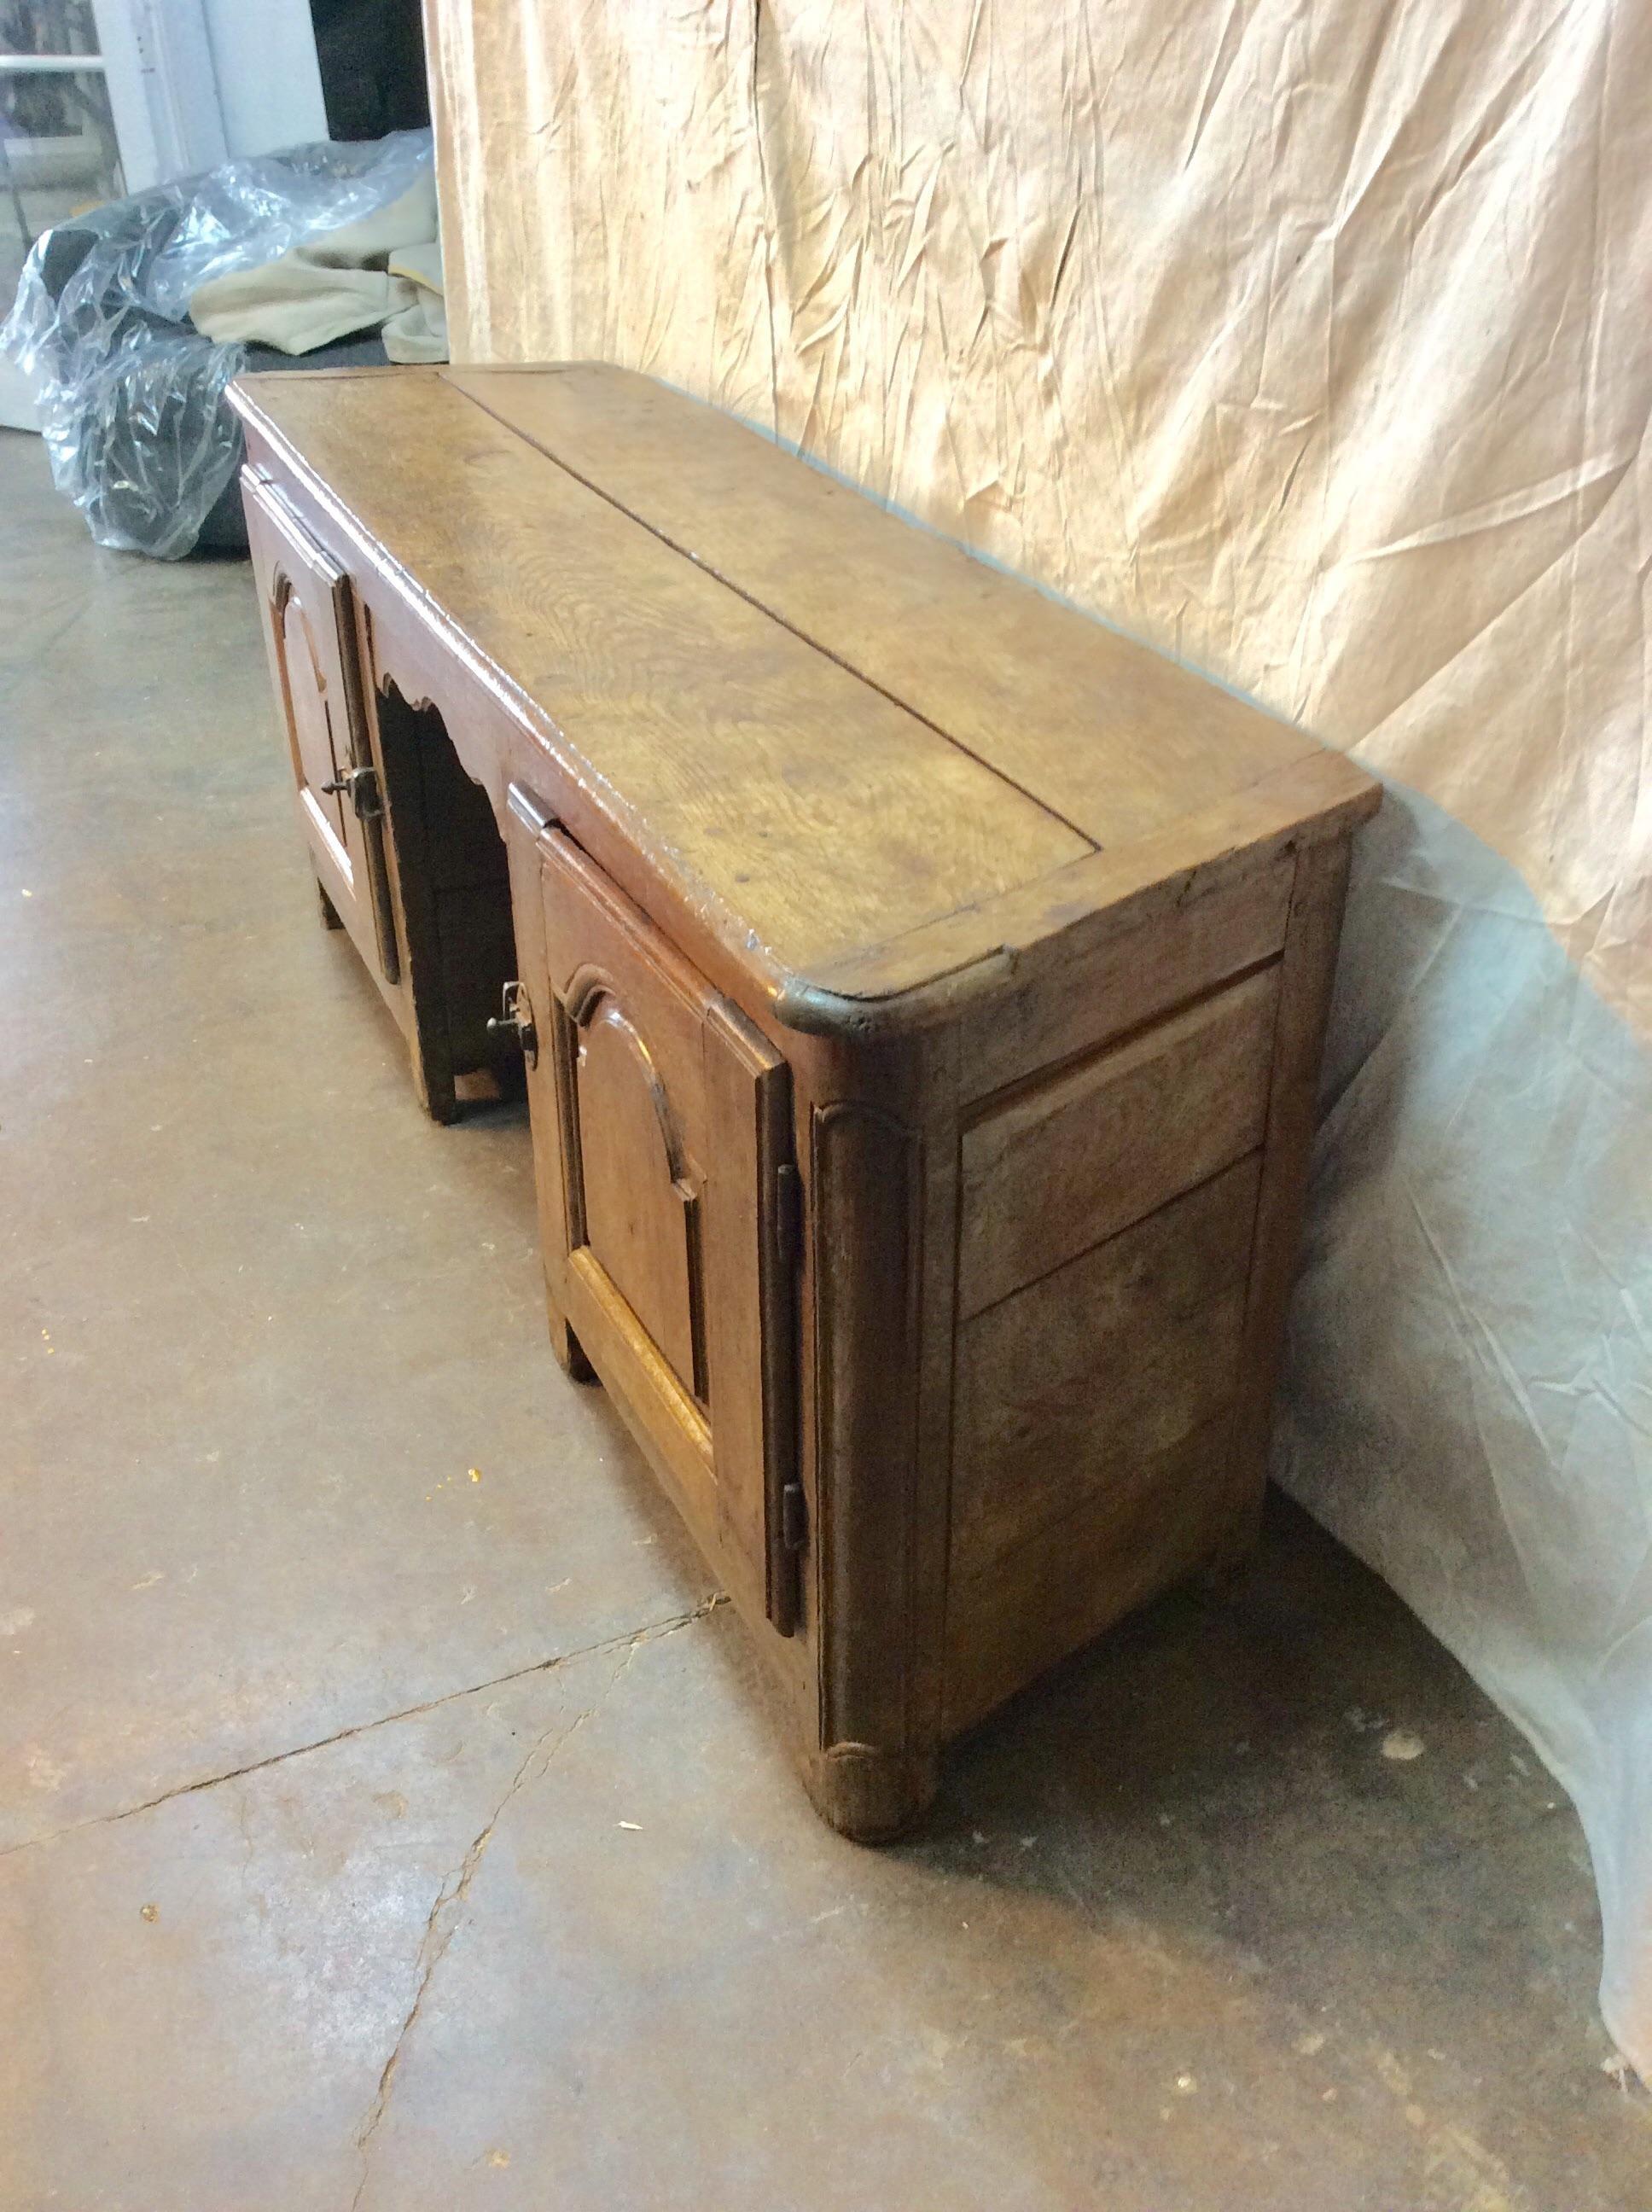 Found in the South of France, this 18th Century French Walnut Cabinet or Console features a two planked top finished with the classic French bread board ends. Wood pegged and hand carved, this piece is constructed with canted angle sides and two